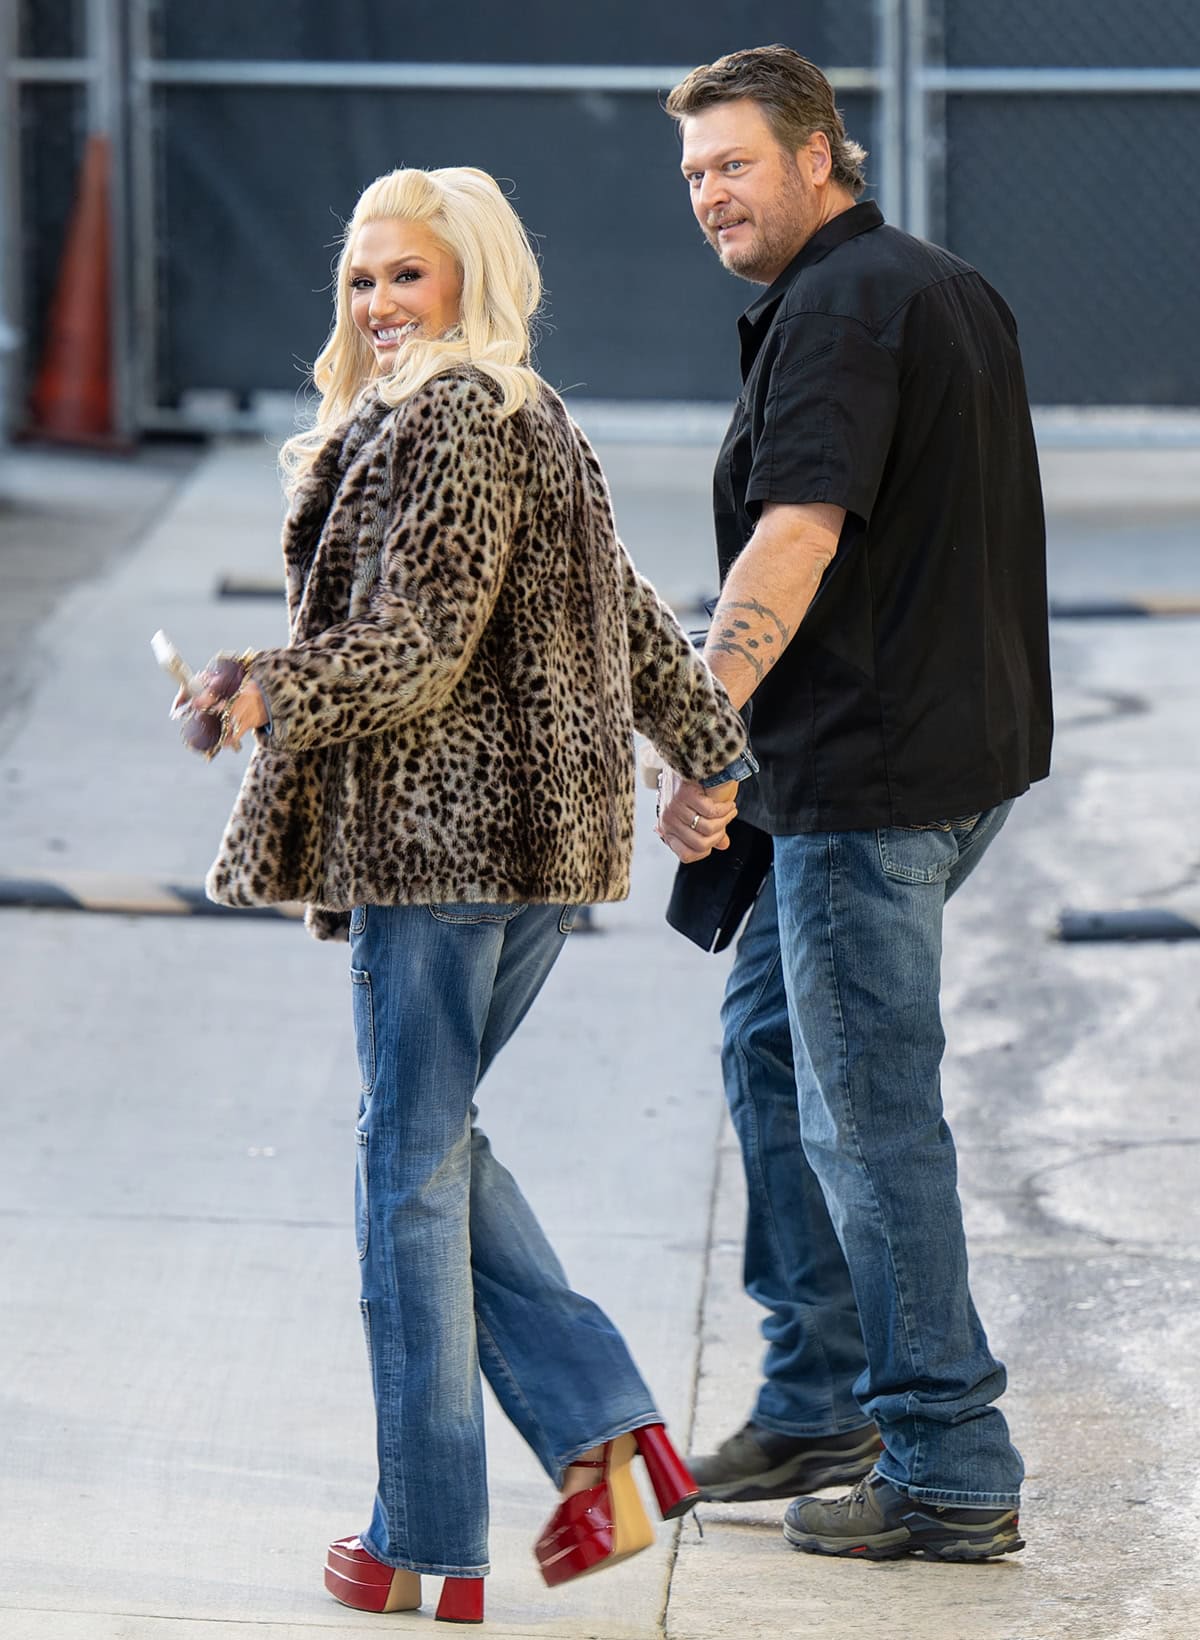 Gwen Stefani, standing at 5 feet 6 inches, and Blake Shelton, at 6 feet 4 inches, showcase their ten-inch height difference while arriving at the Jimmy Kimmel show on February 14, 2024, in Hollywood, California